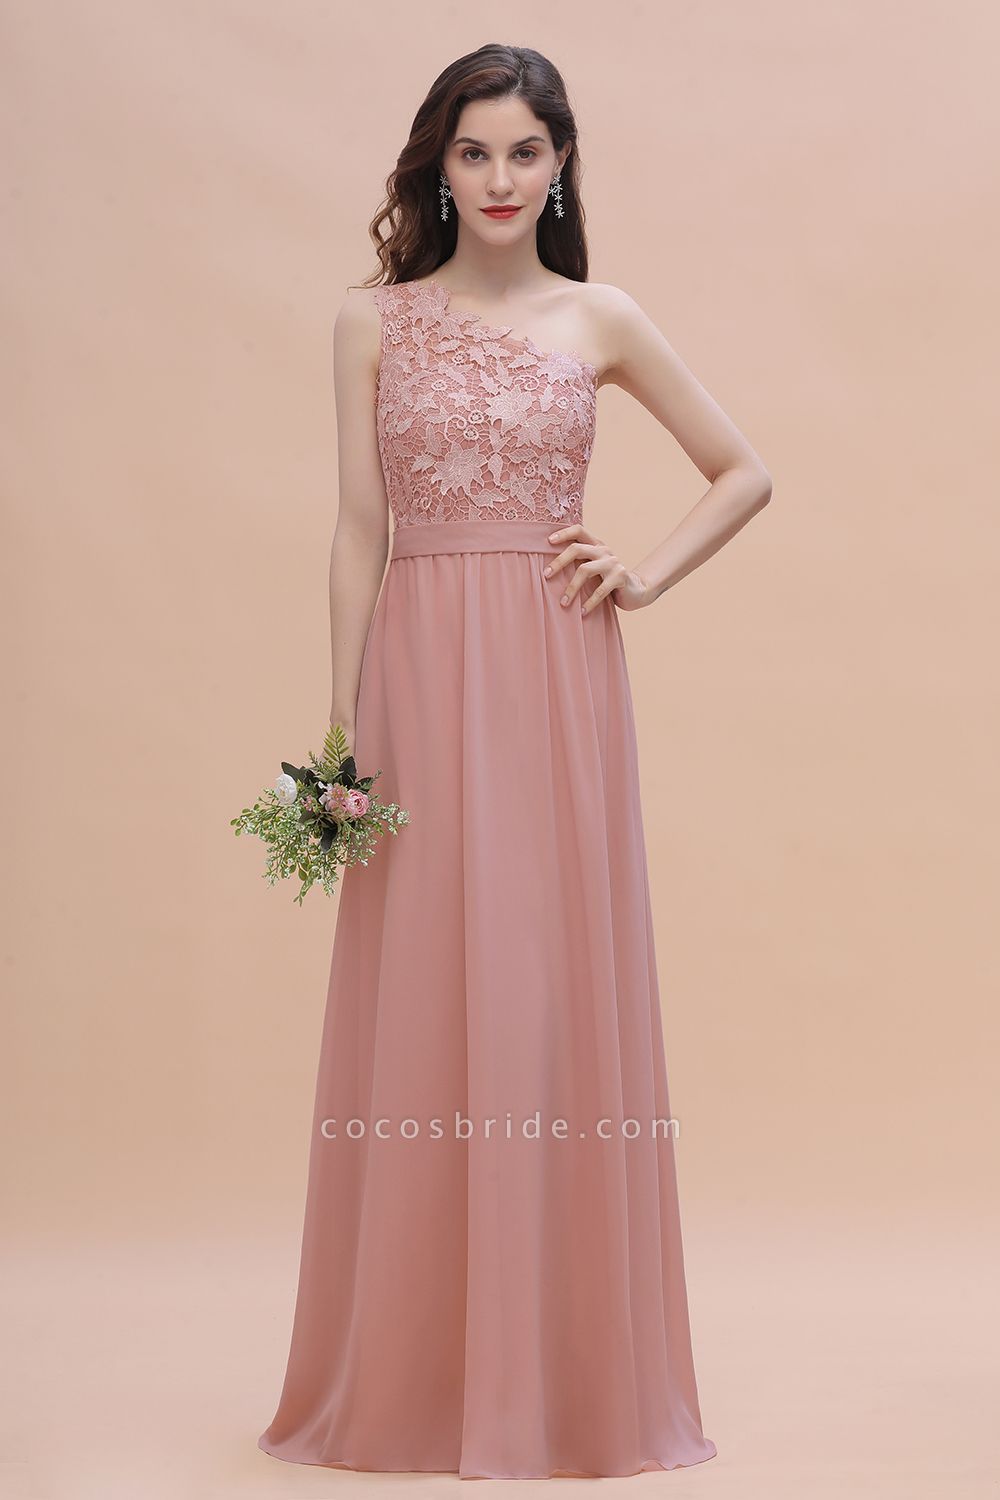 One Shoulder Floor-length A-Line Chiffon Bridesmaid Dress With Appliques Lace